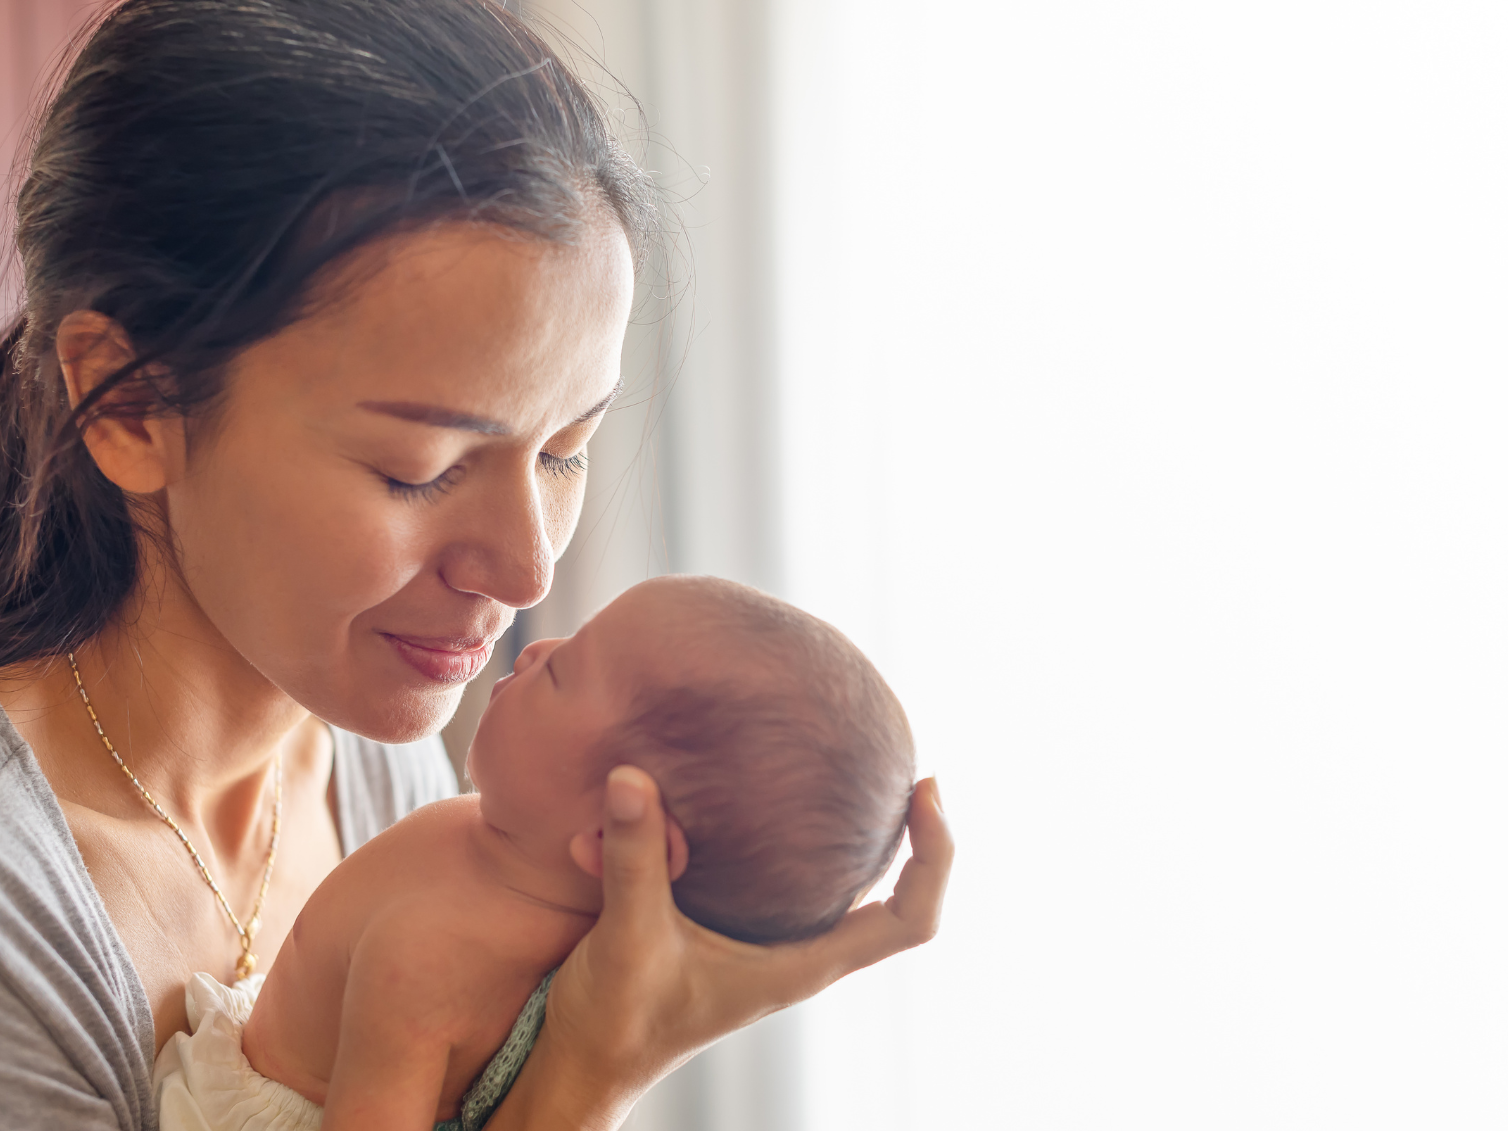 Newborn Care Tips: A Guide for New Parents